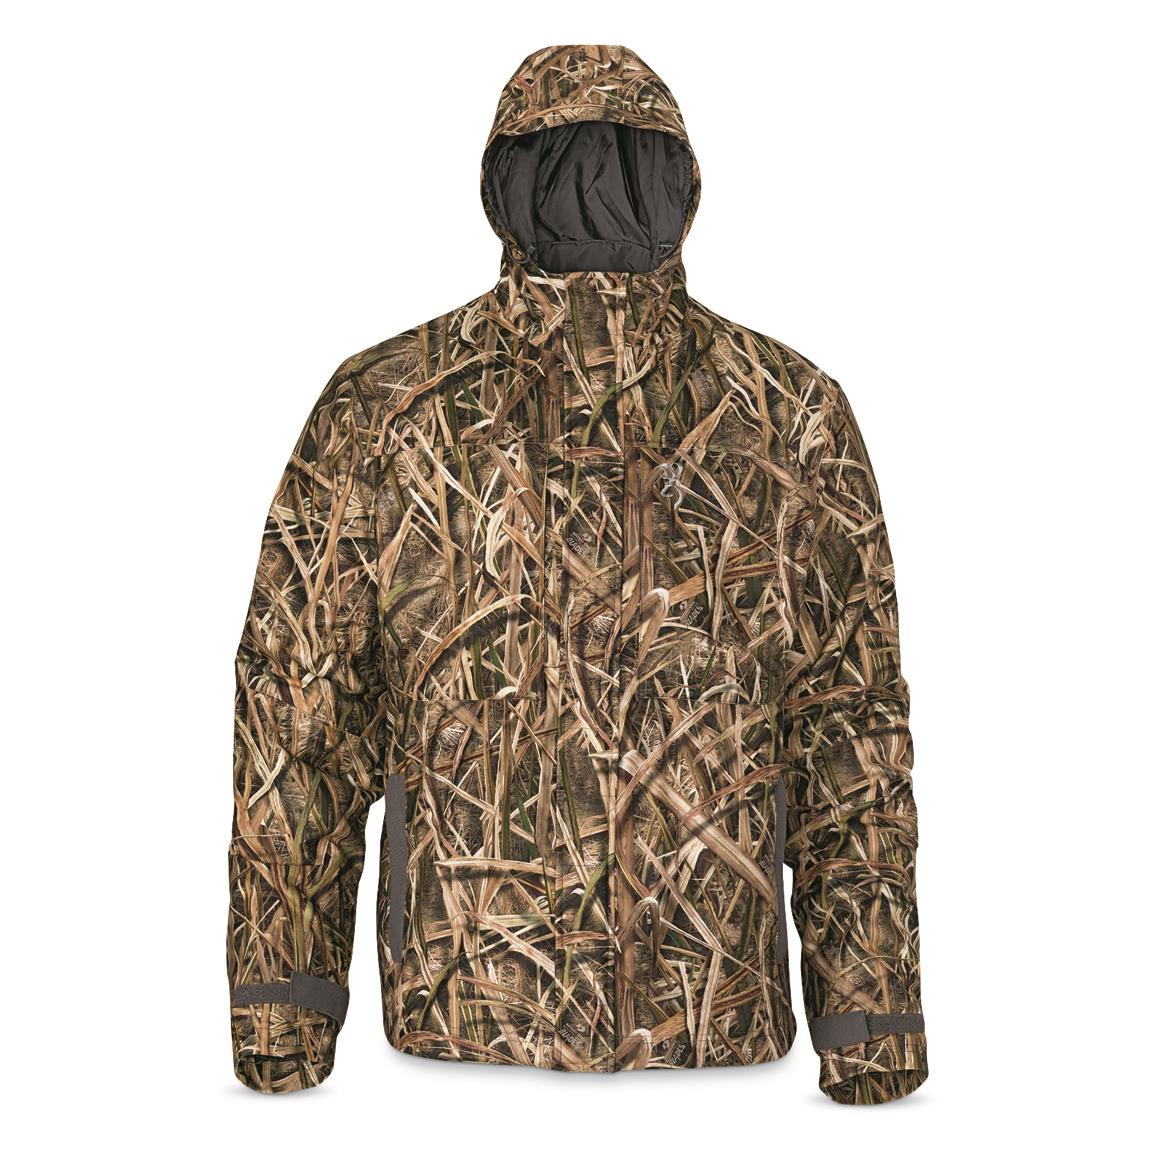 MOSSY OAK SHADOW GRASS BLADES CAMO NEW BROWNING WICKED WING 3-N-1 PARKA 